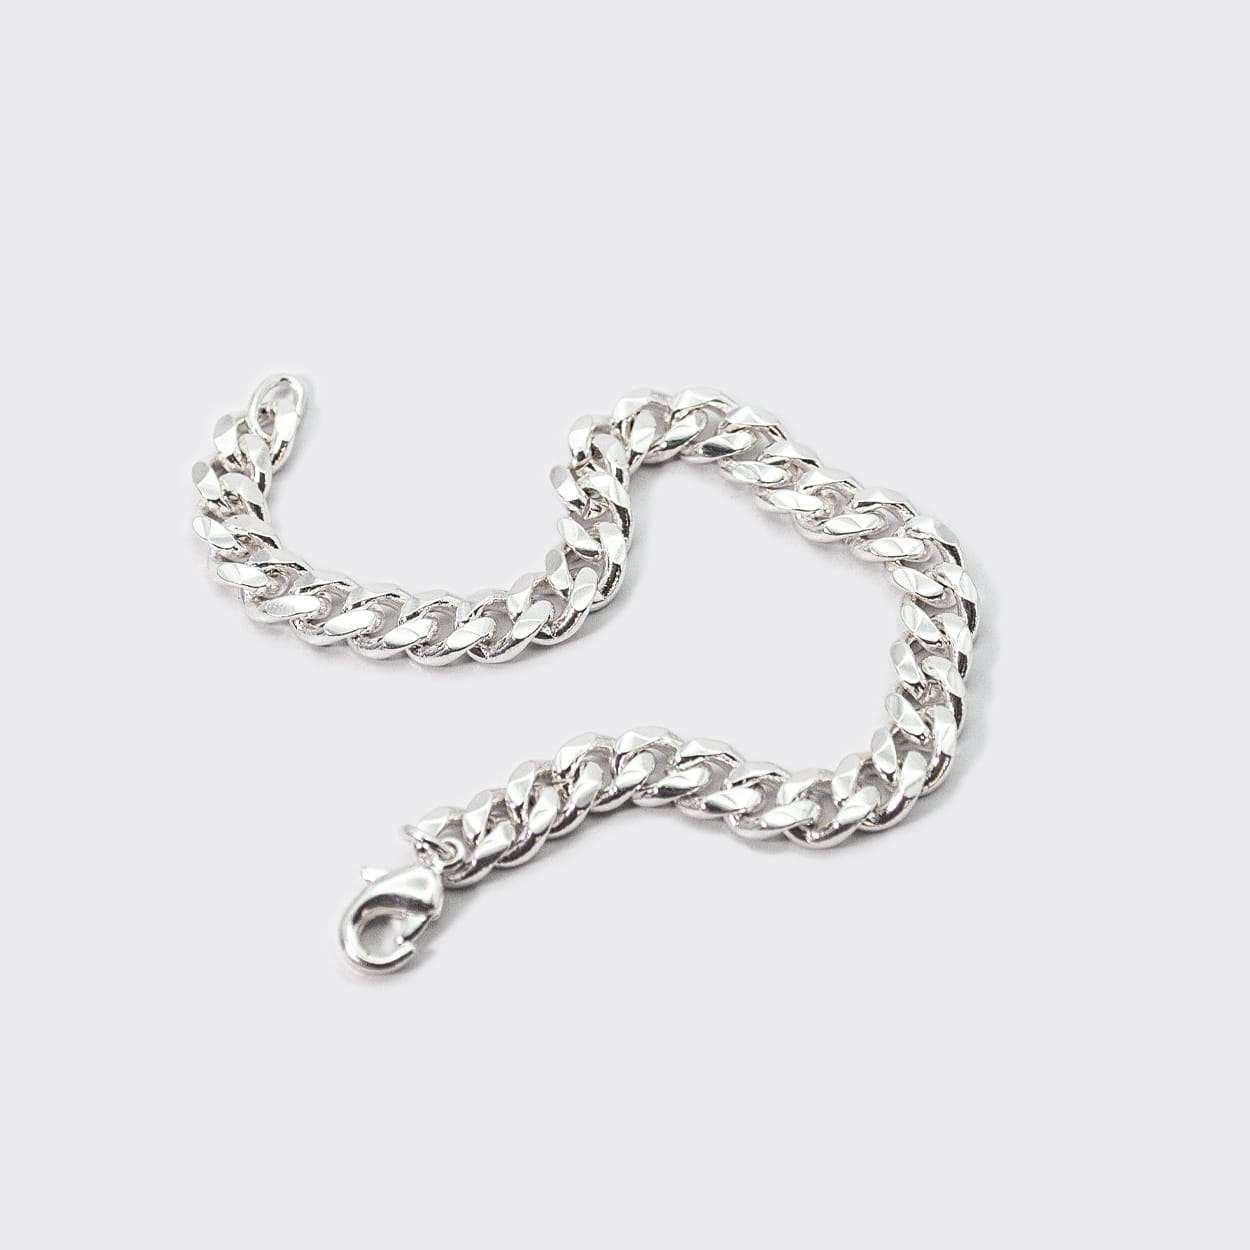 The Havana bracelet is a cuban chain made of a high-quality 925 Sterling silver (10 microns). It is made in Spain and fits both men or women. It is a unisex bracelet.